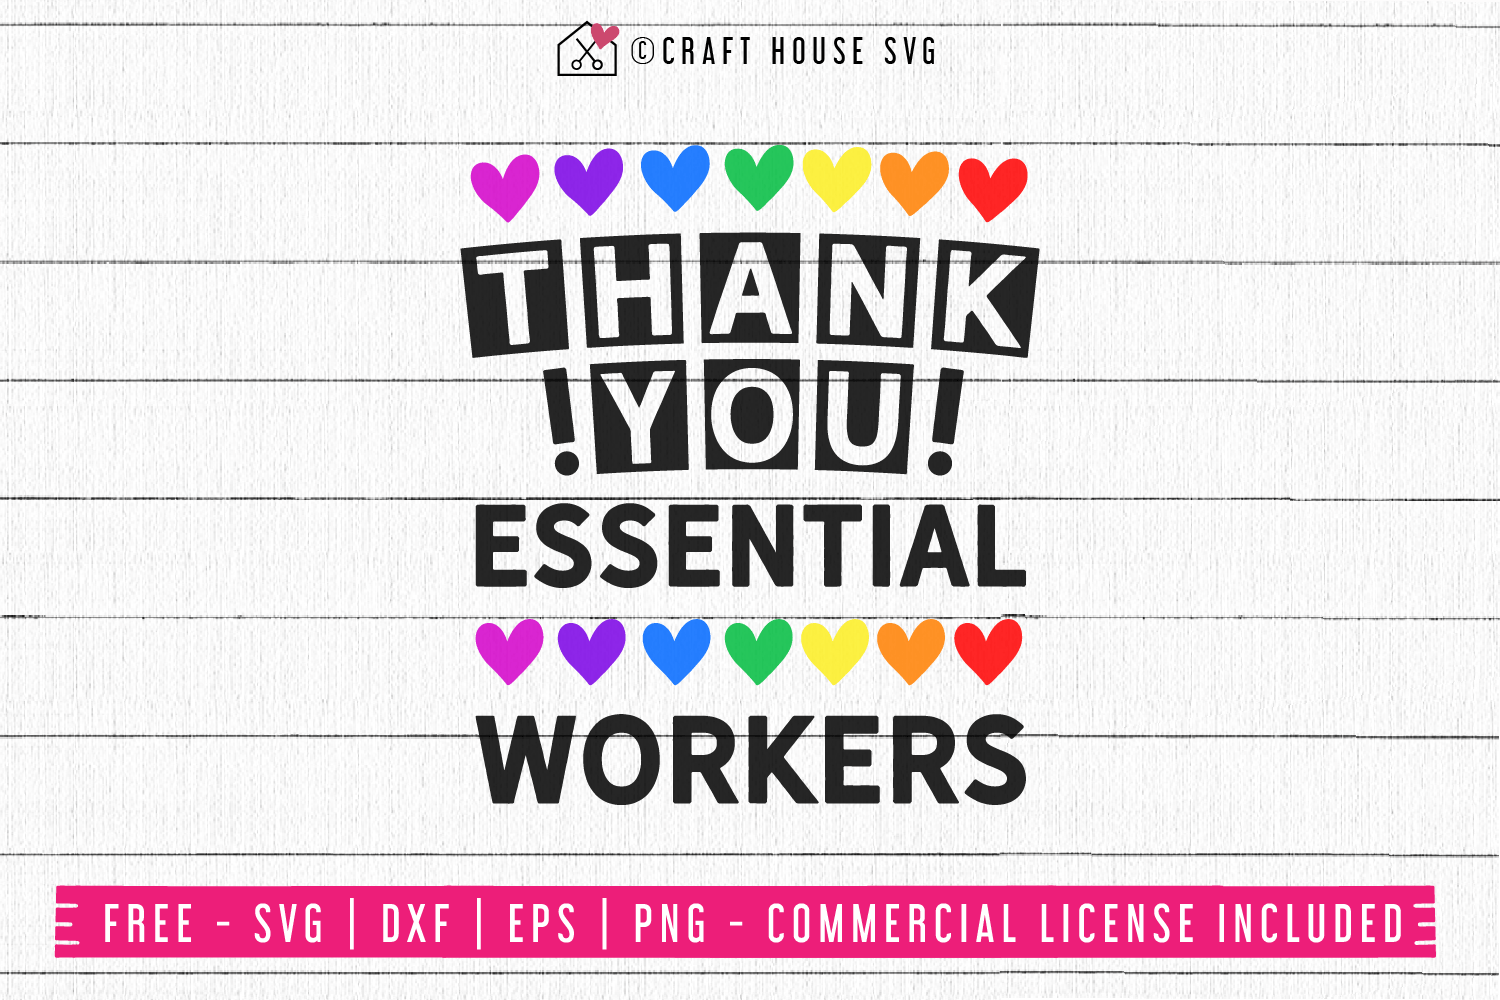 Thank You Essential Workers SVG | FB82 Craft House SVG - SVG files for Cricut and Silhouette